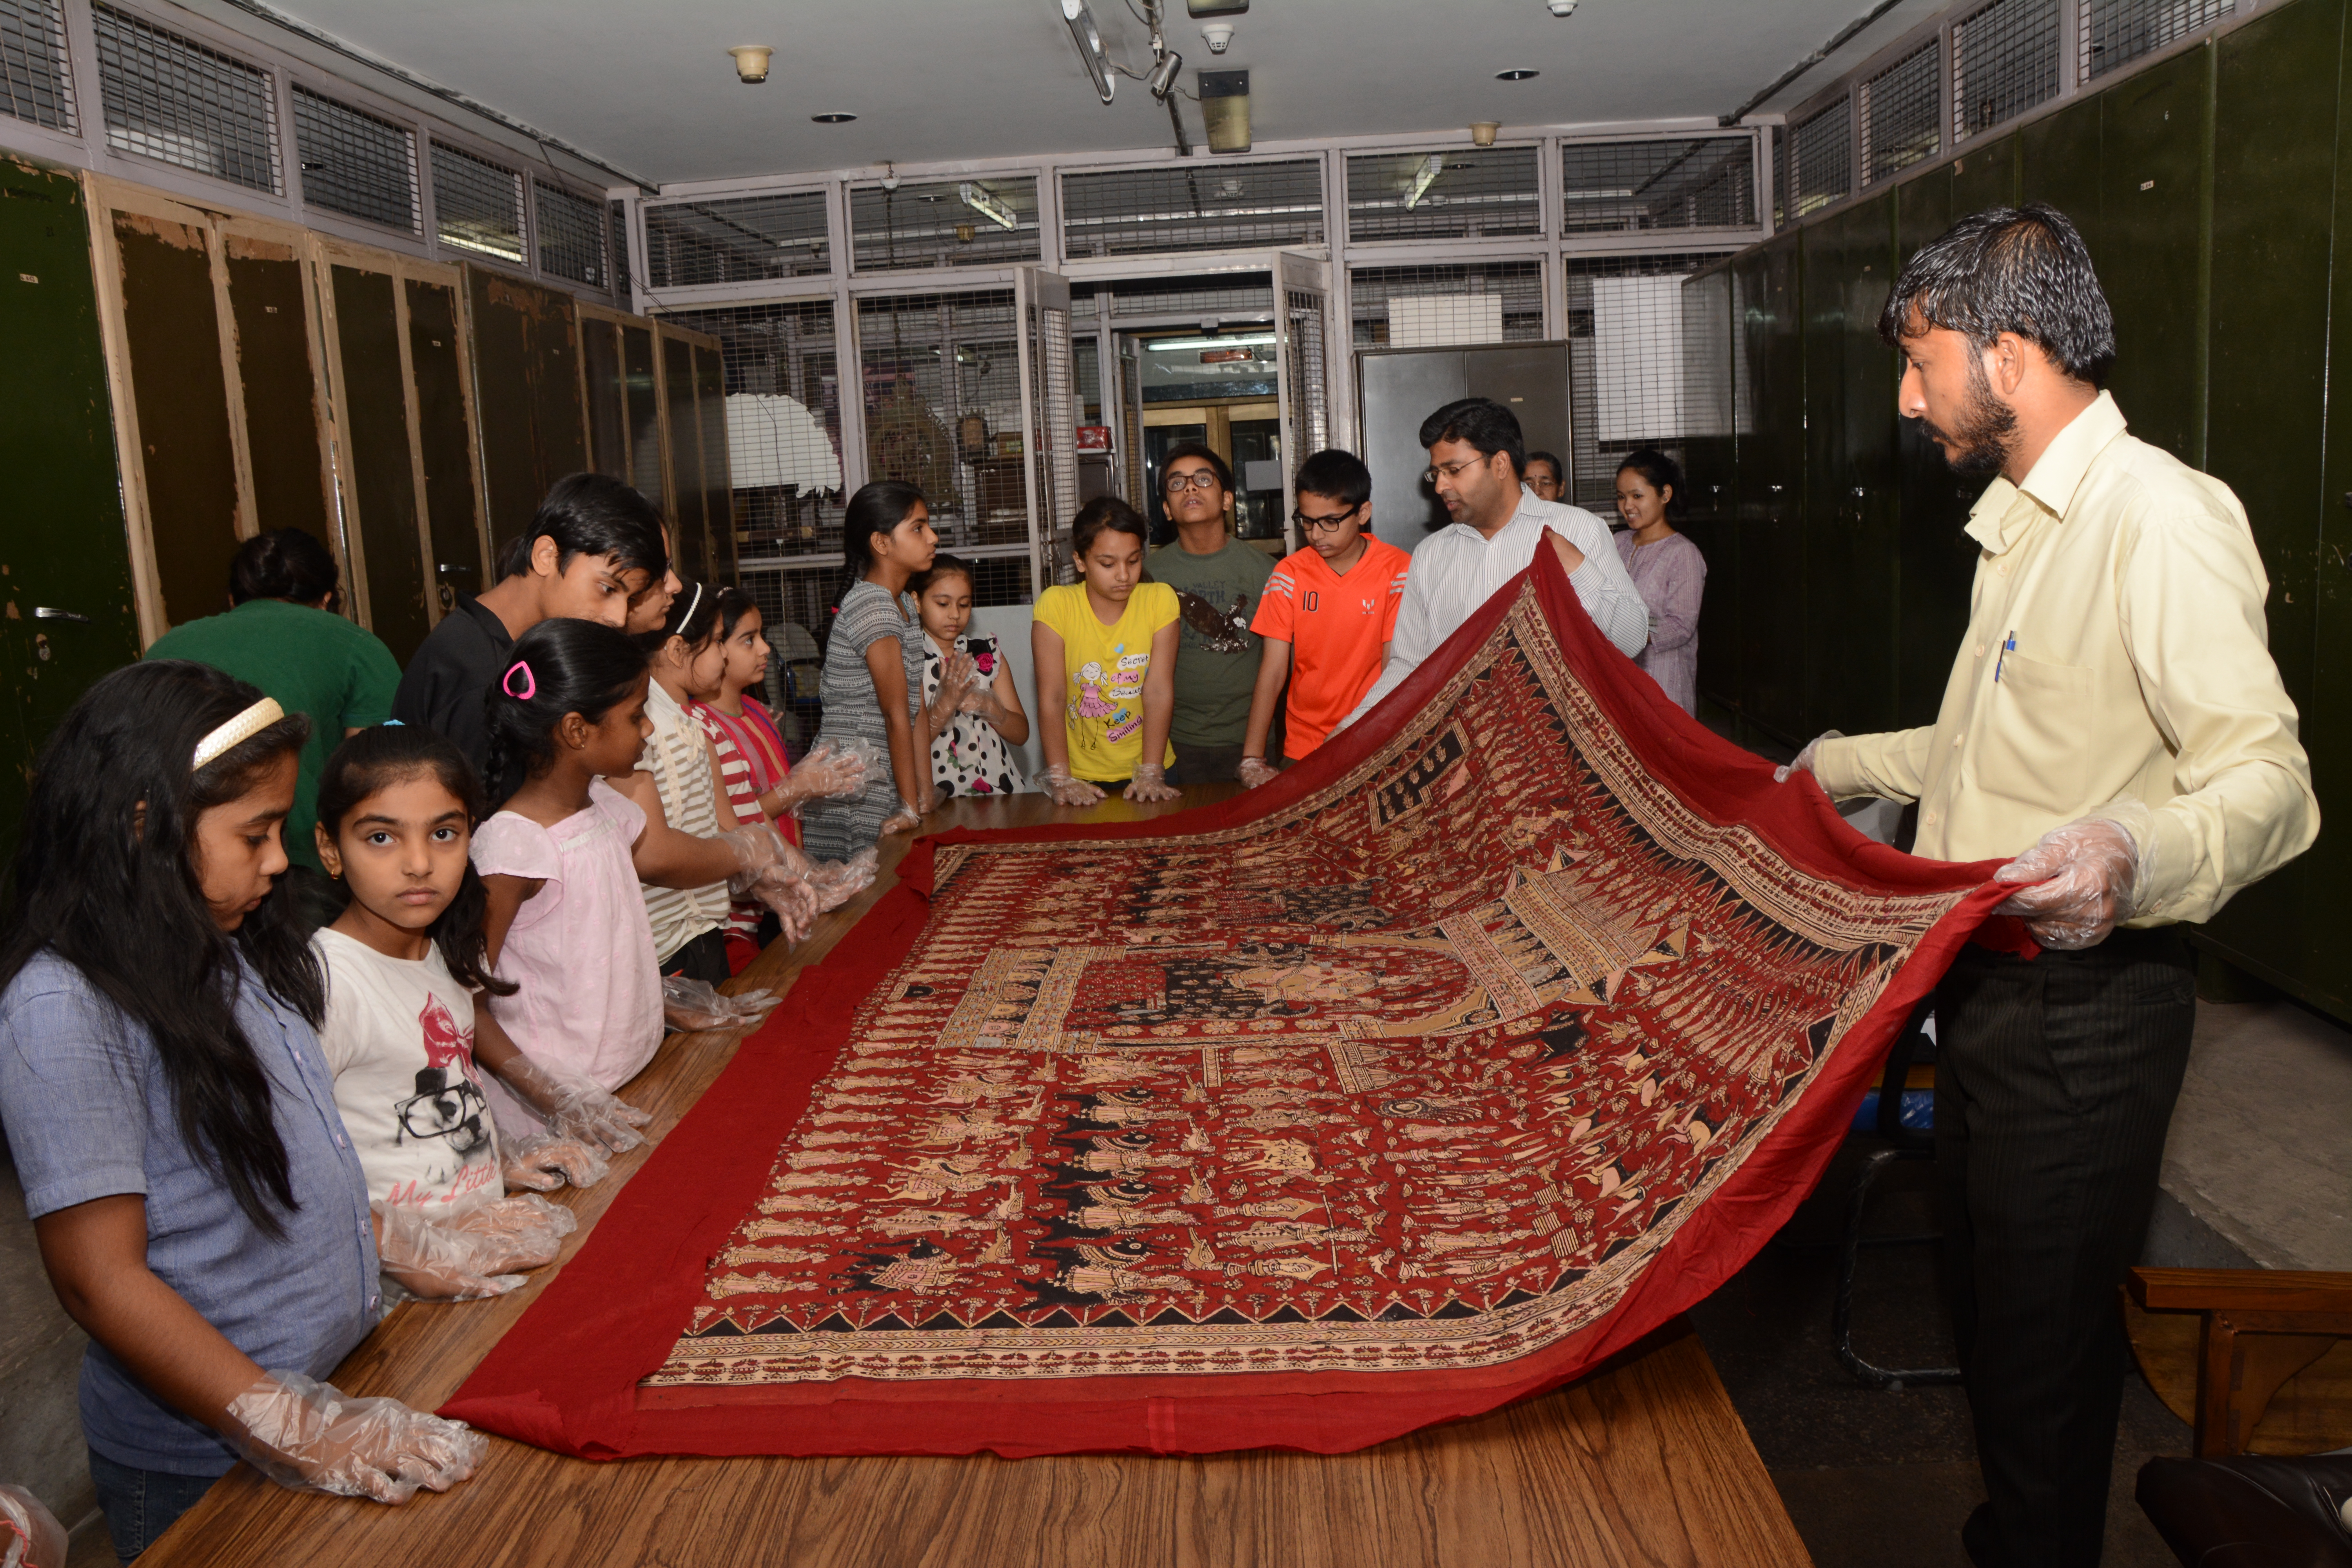 The Contribution of the Decorative Arts Department at the National Museum of India to Sustaining Cultural Heritage